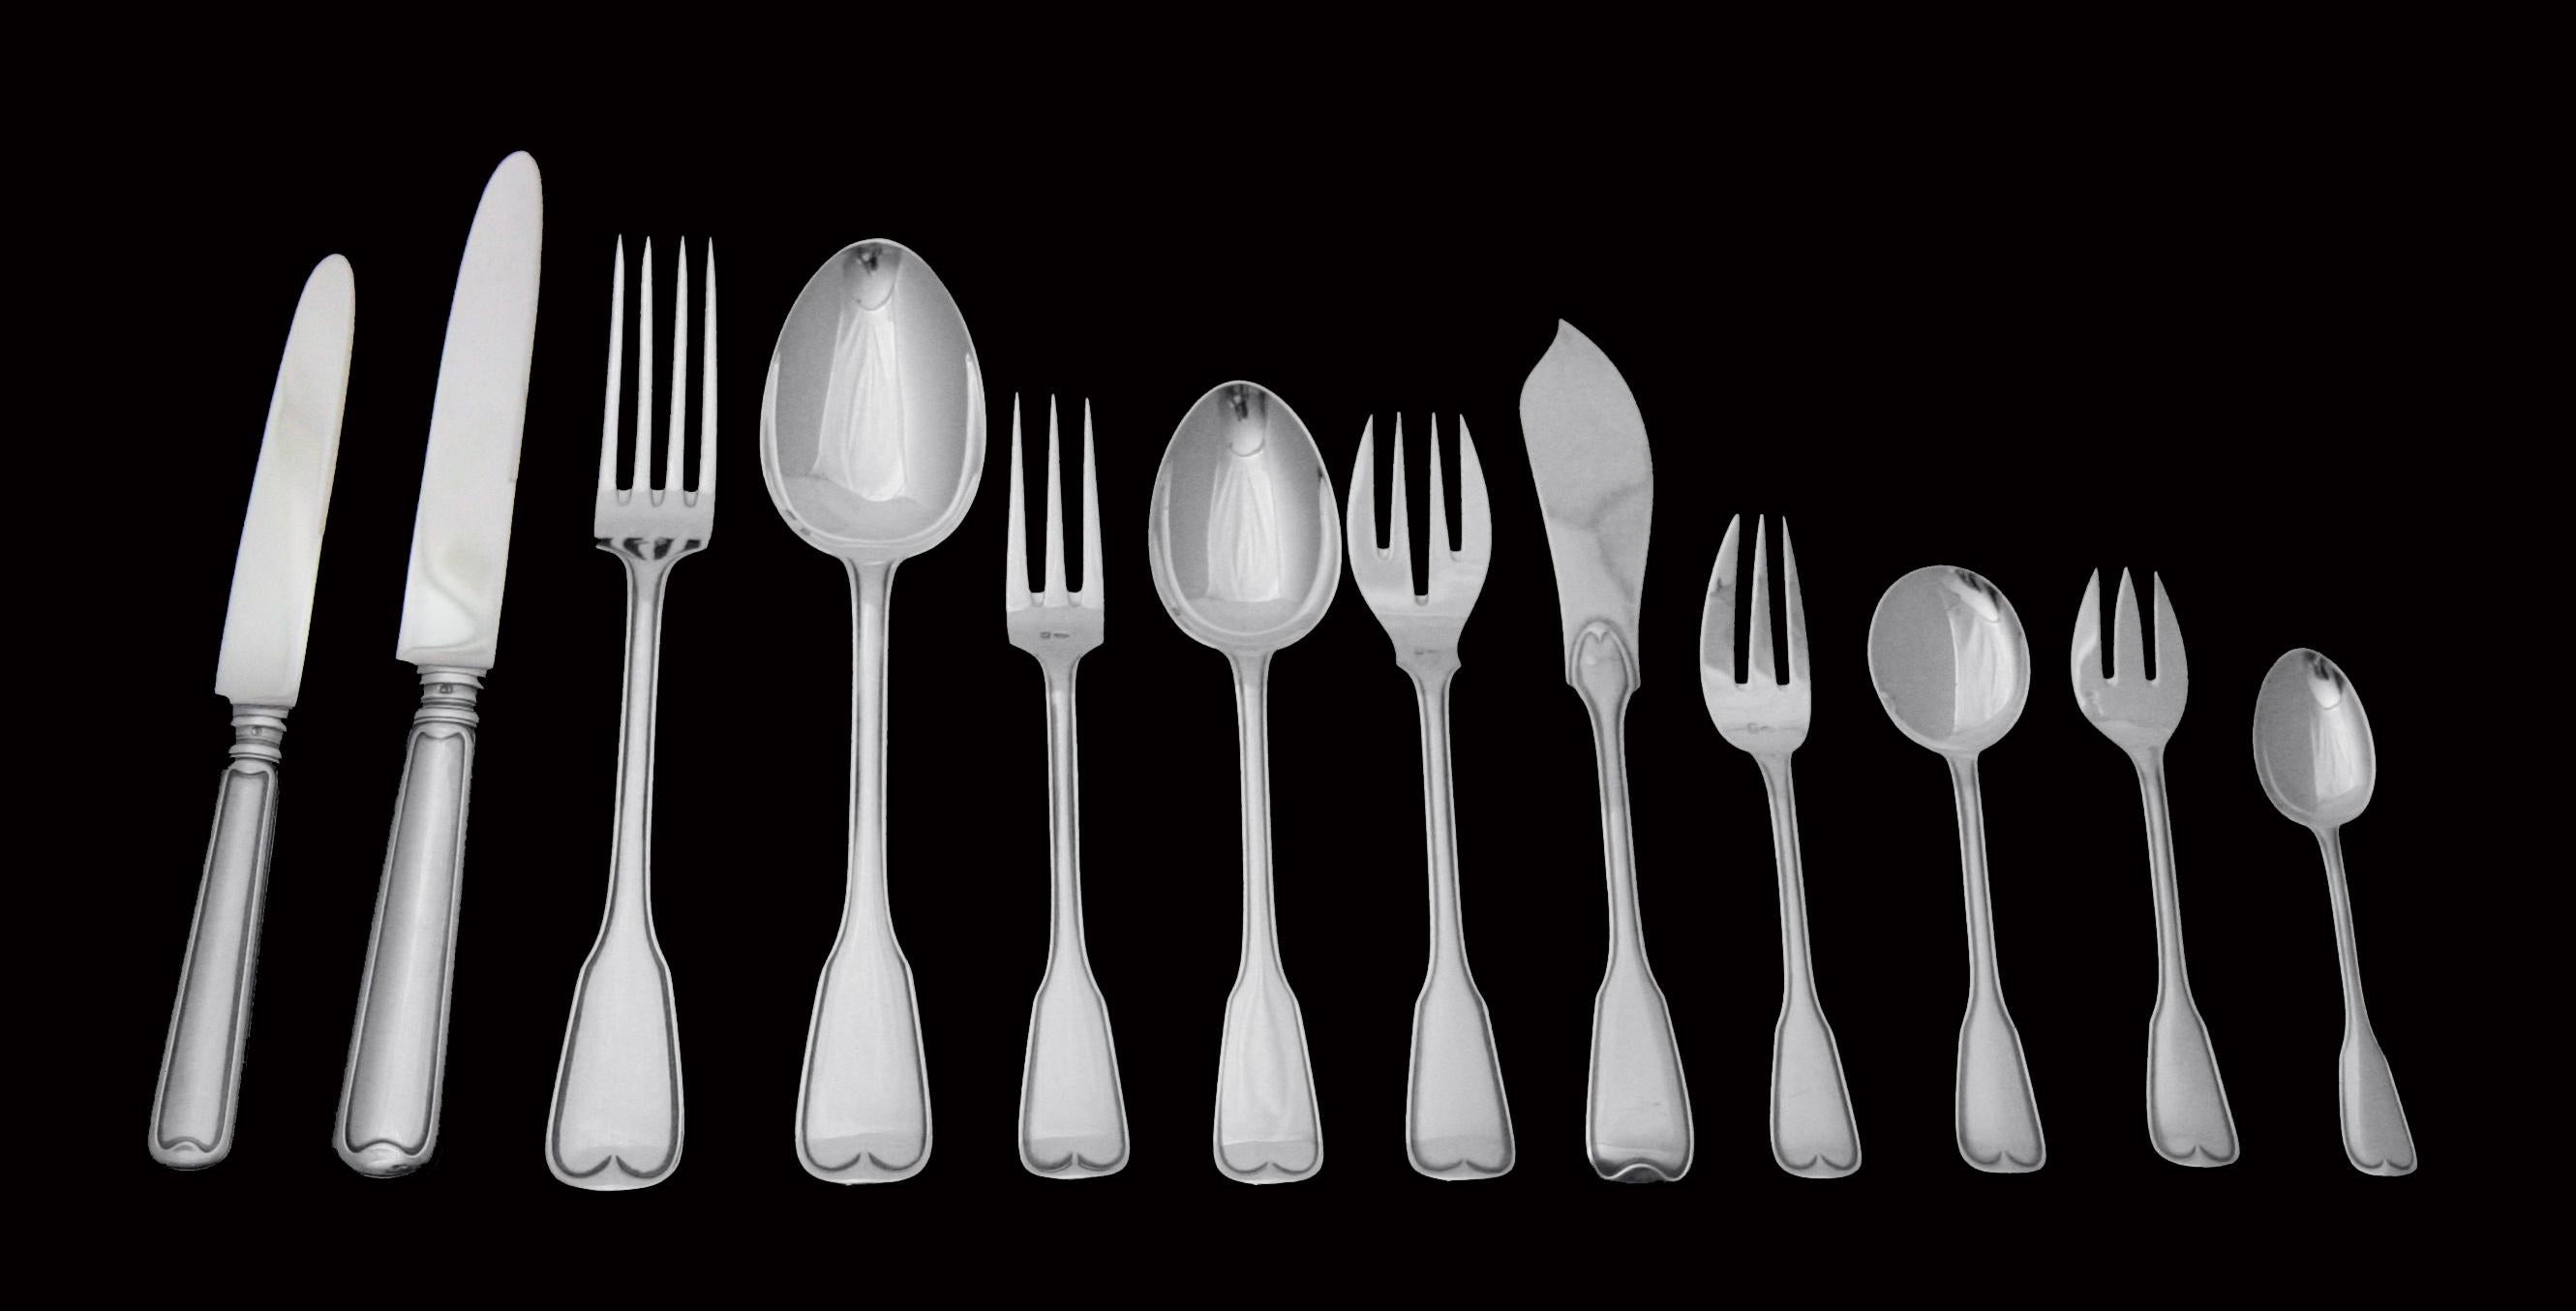 Direct from a Private Residence in Monte Carlo, A Magnificent 256pc. 19th Century 835 Silver Flatware Set in Near New Condition by Belgium's Premier Silversmiths 